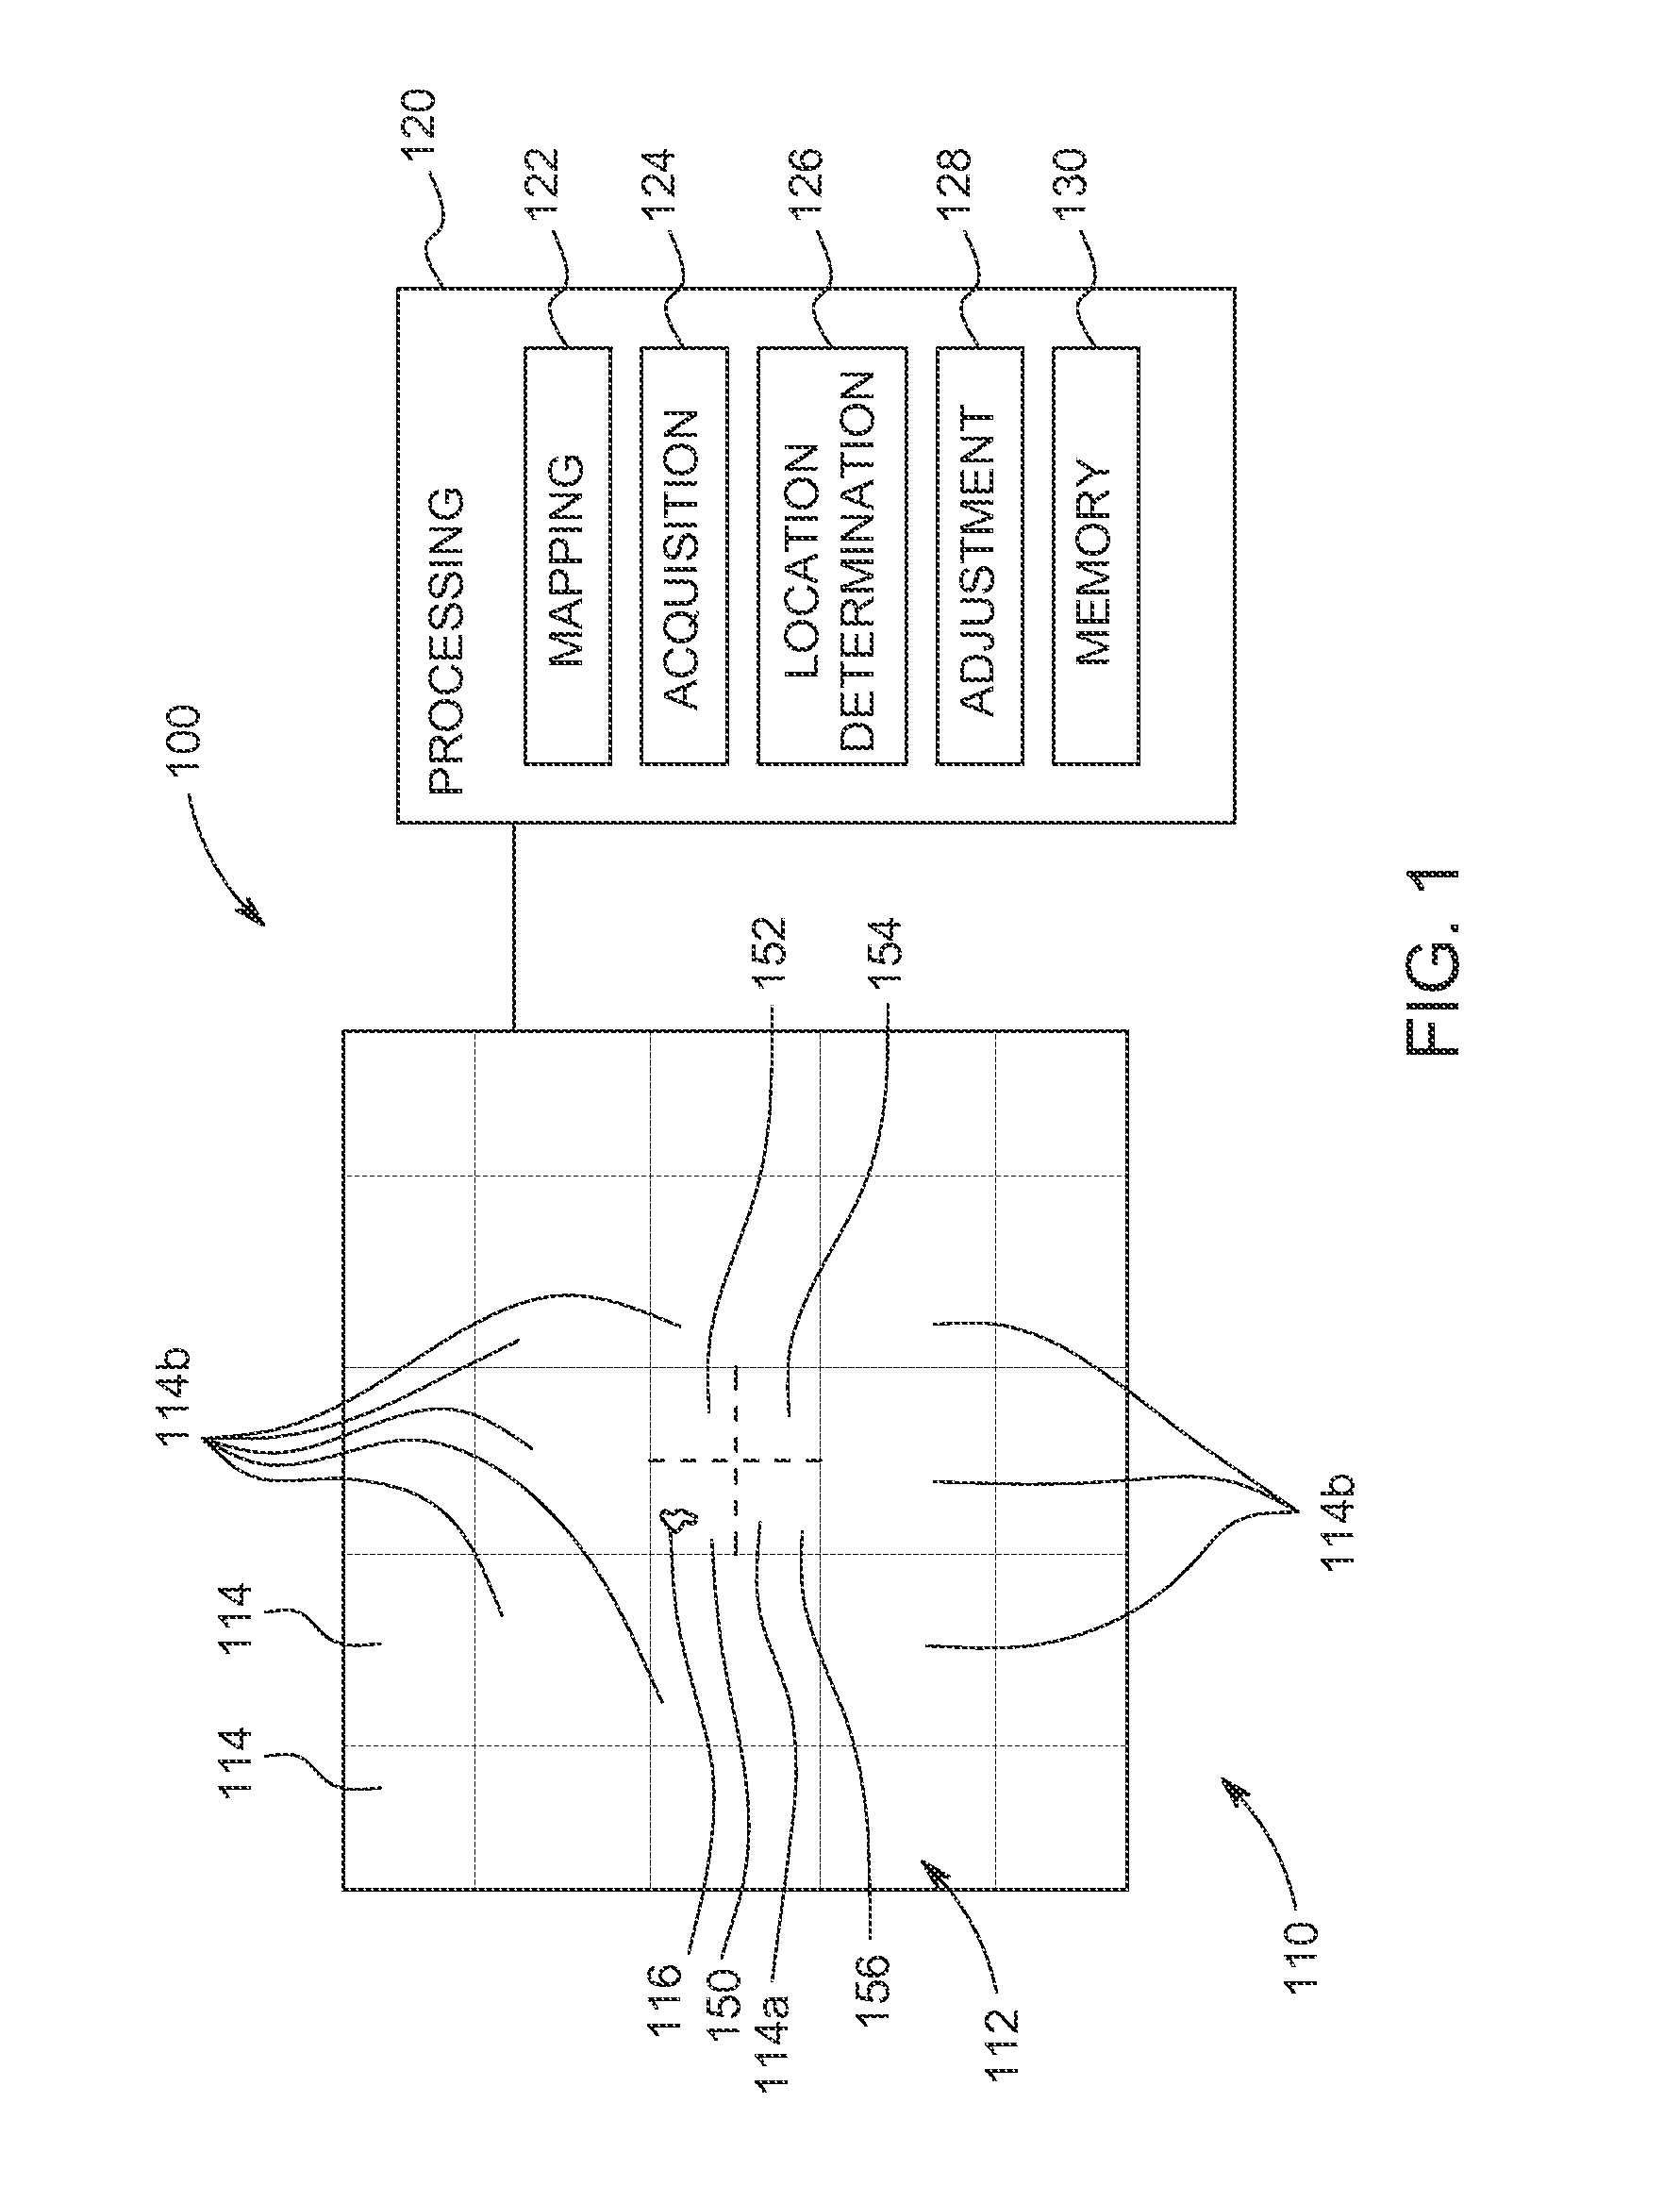 Systems and methods for improving energy resolution by sub-pixel energy calibration